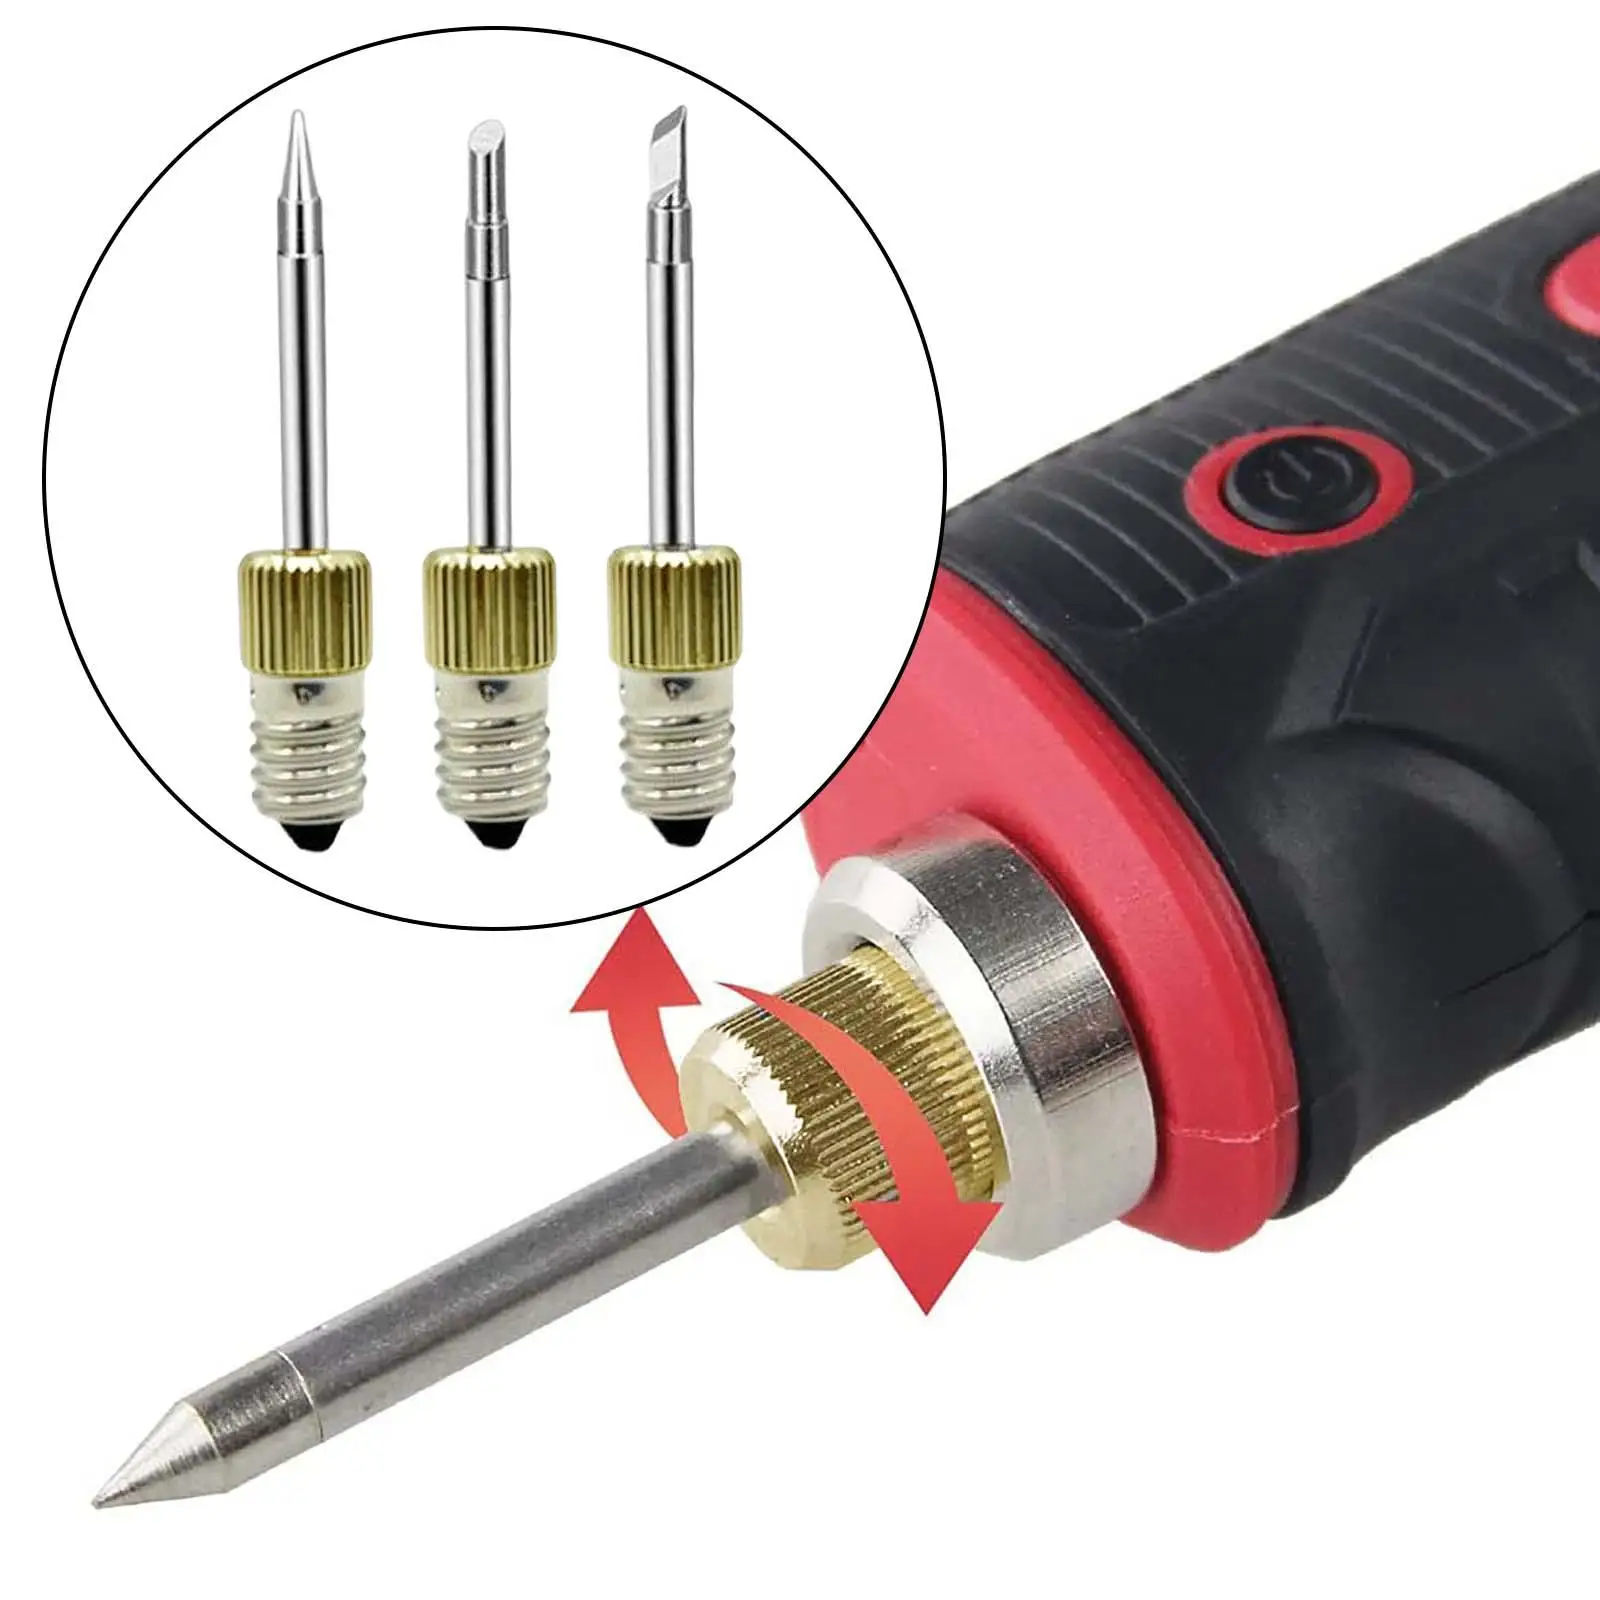 3Pcs Durable Soldering Iron Tips Replaceable E10 Components Tool Needle Tips Accessories Threaded solder for Repair Indoor